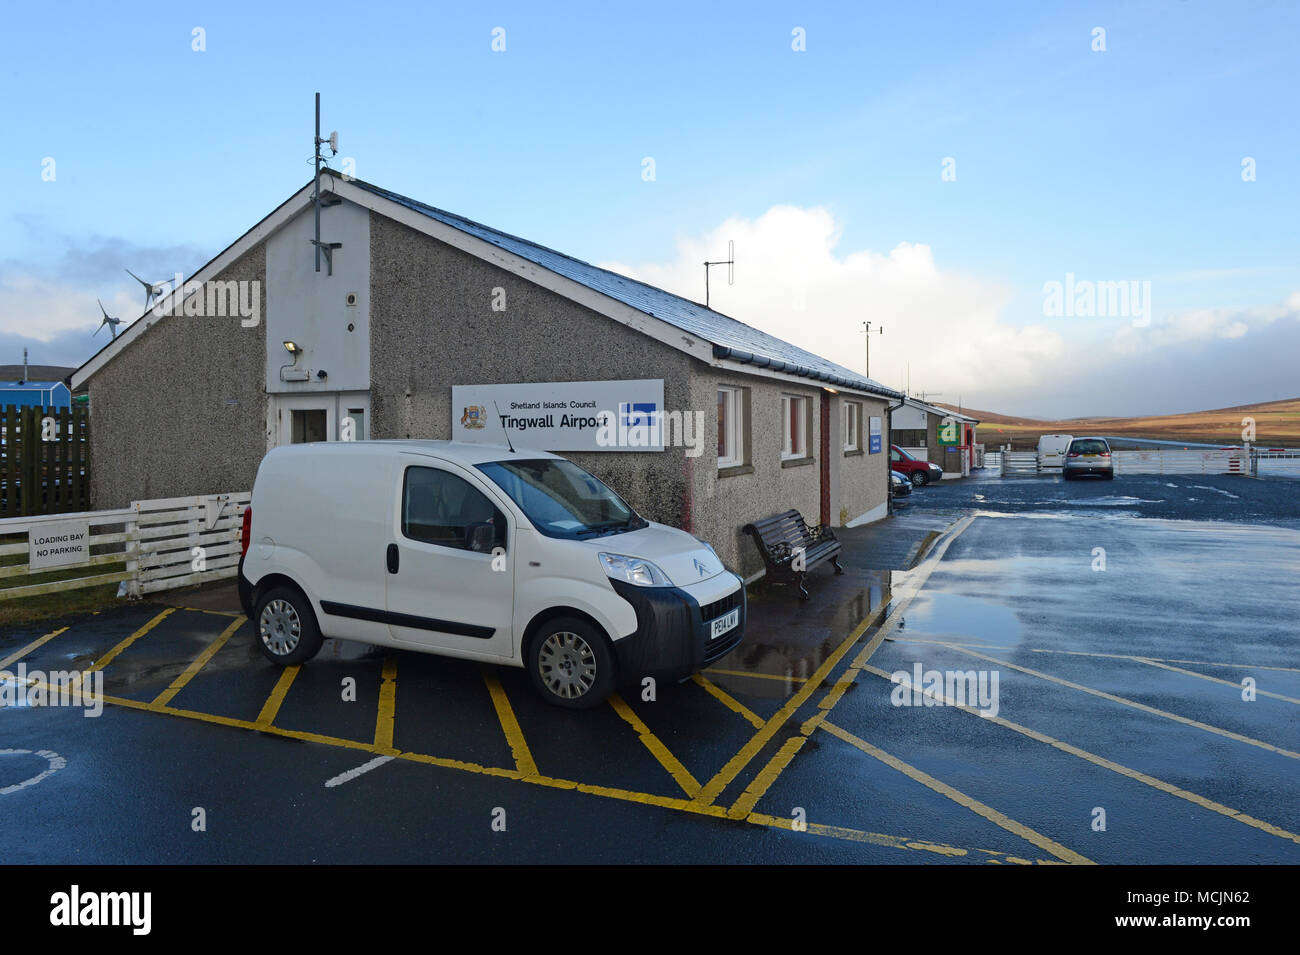 Tingwall airport. Shetland's internal airport for the islands Stock Photo